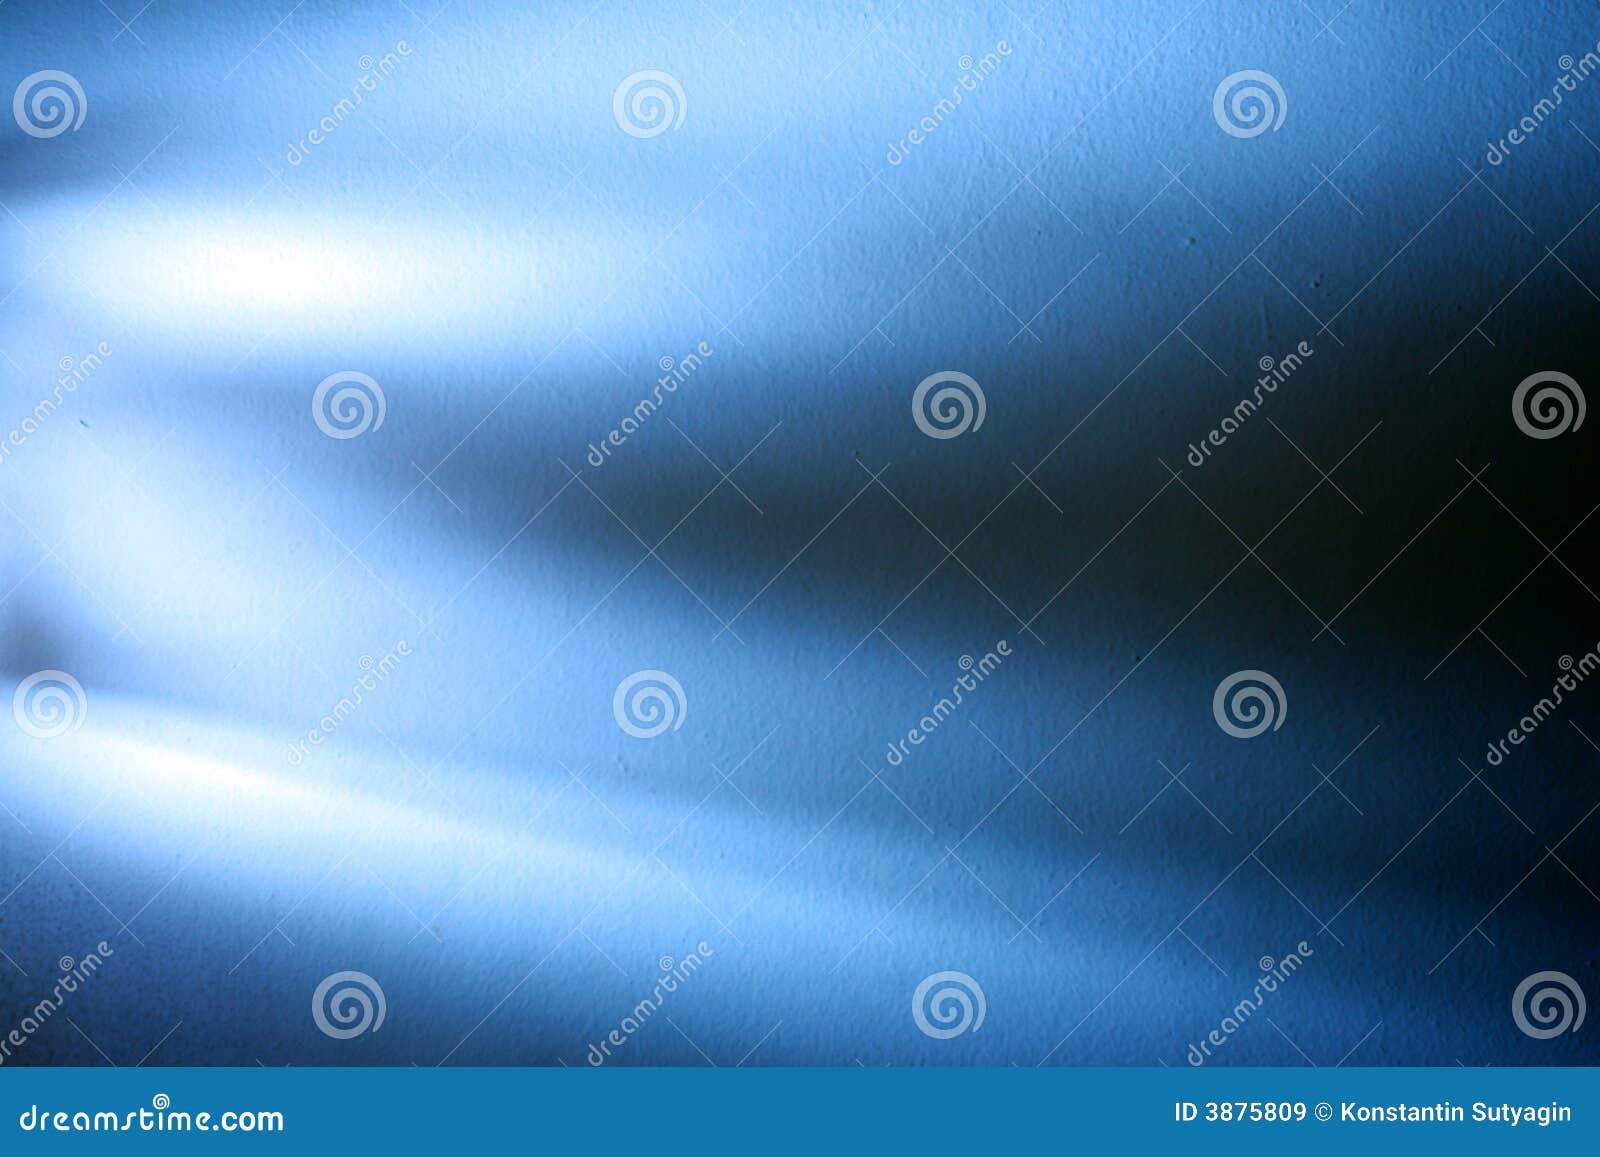 Abstract background stock image. Image of texture, copyspace - 3875809